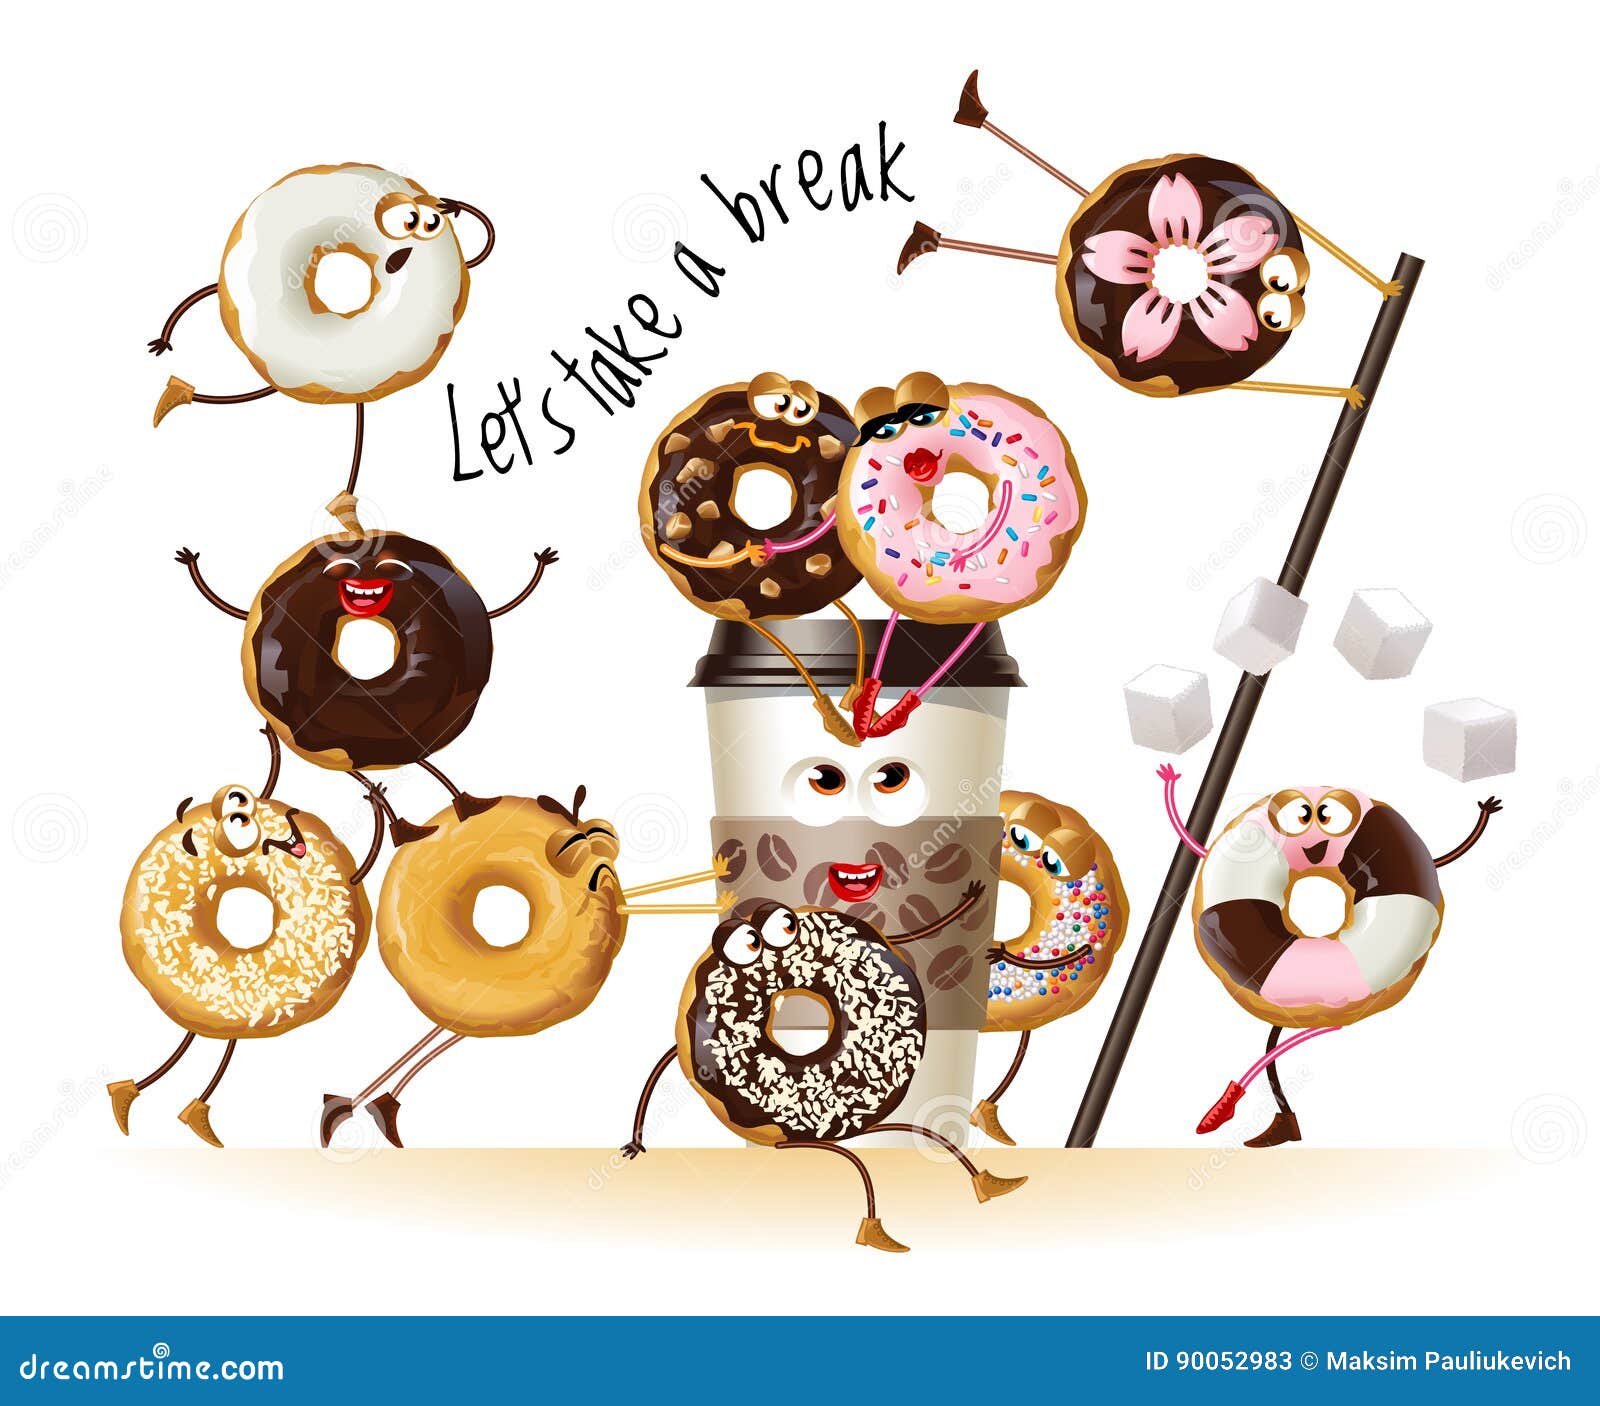  a poster with cartoon characters donuts